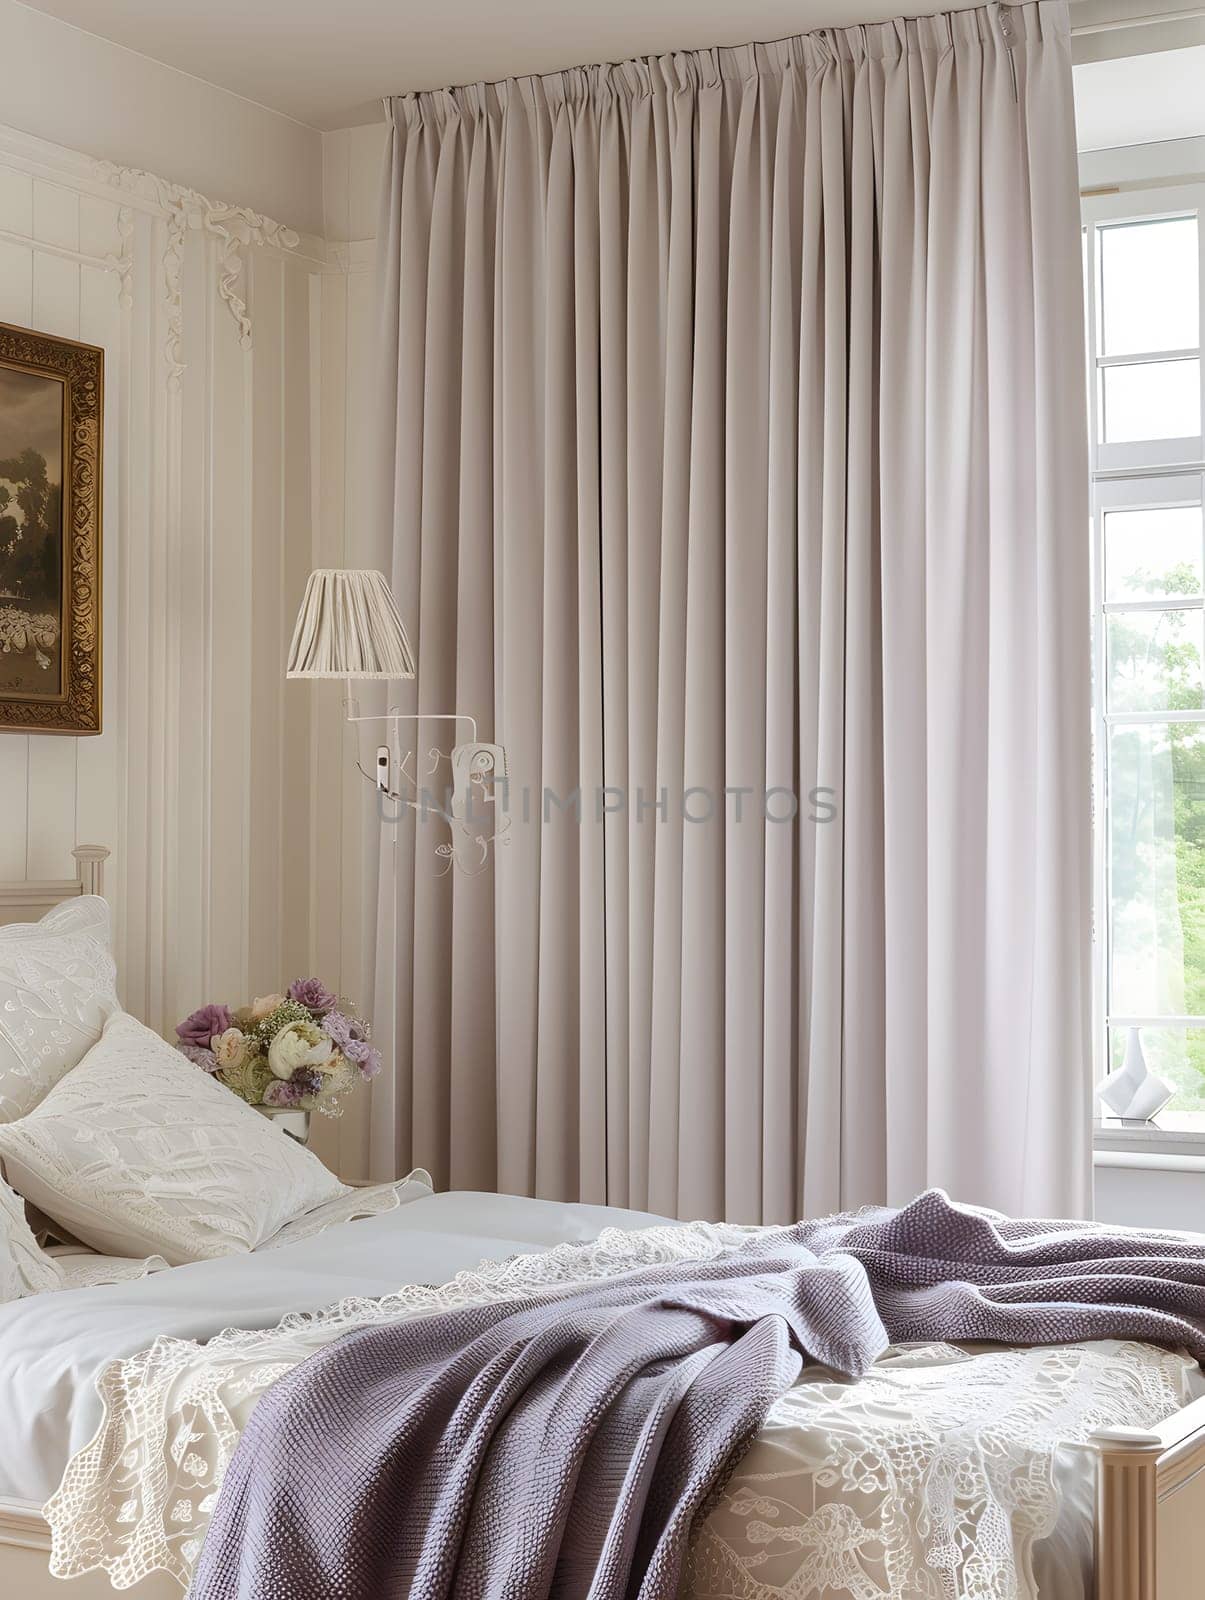 Bedroom with white curtains, purple blanket, and wooden bed frame for comfort by Nadtochiy